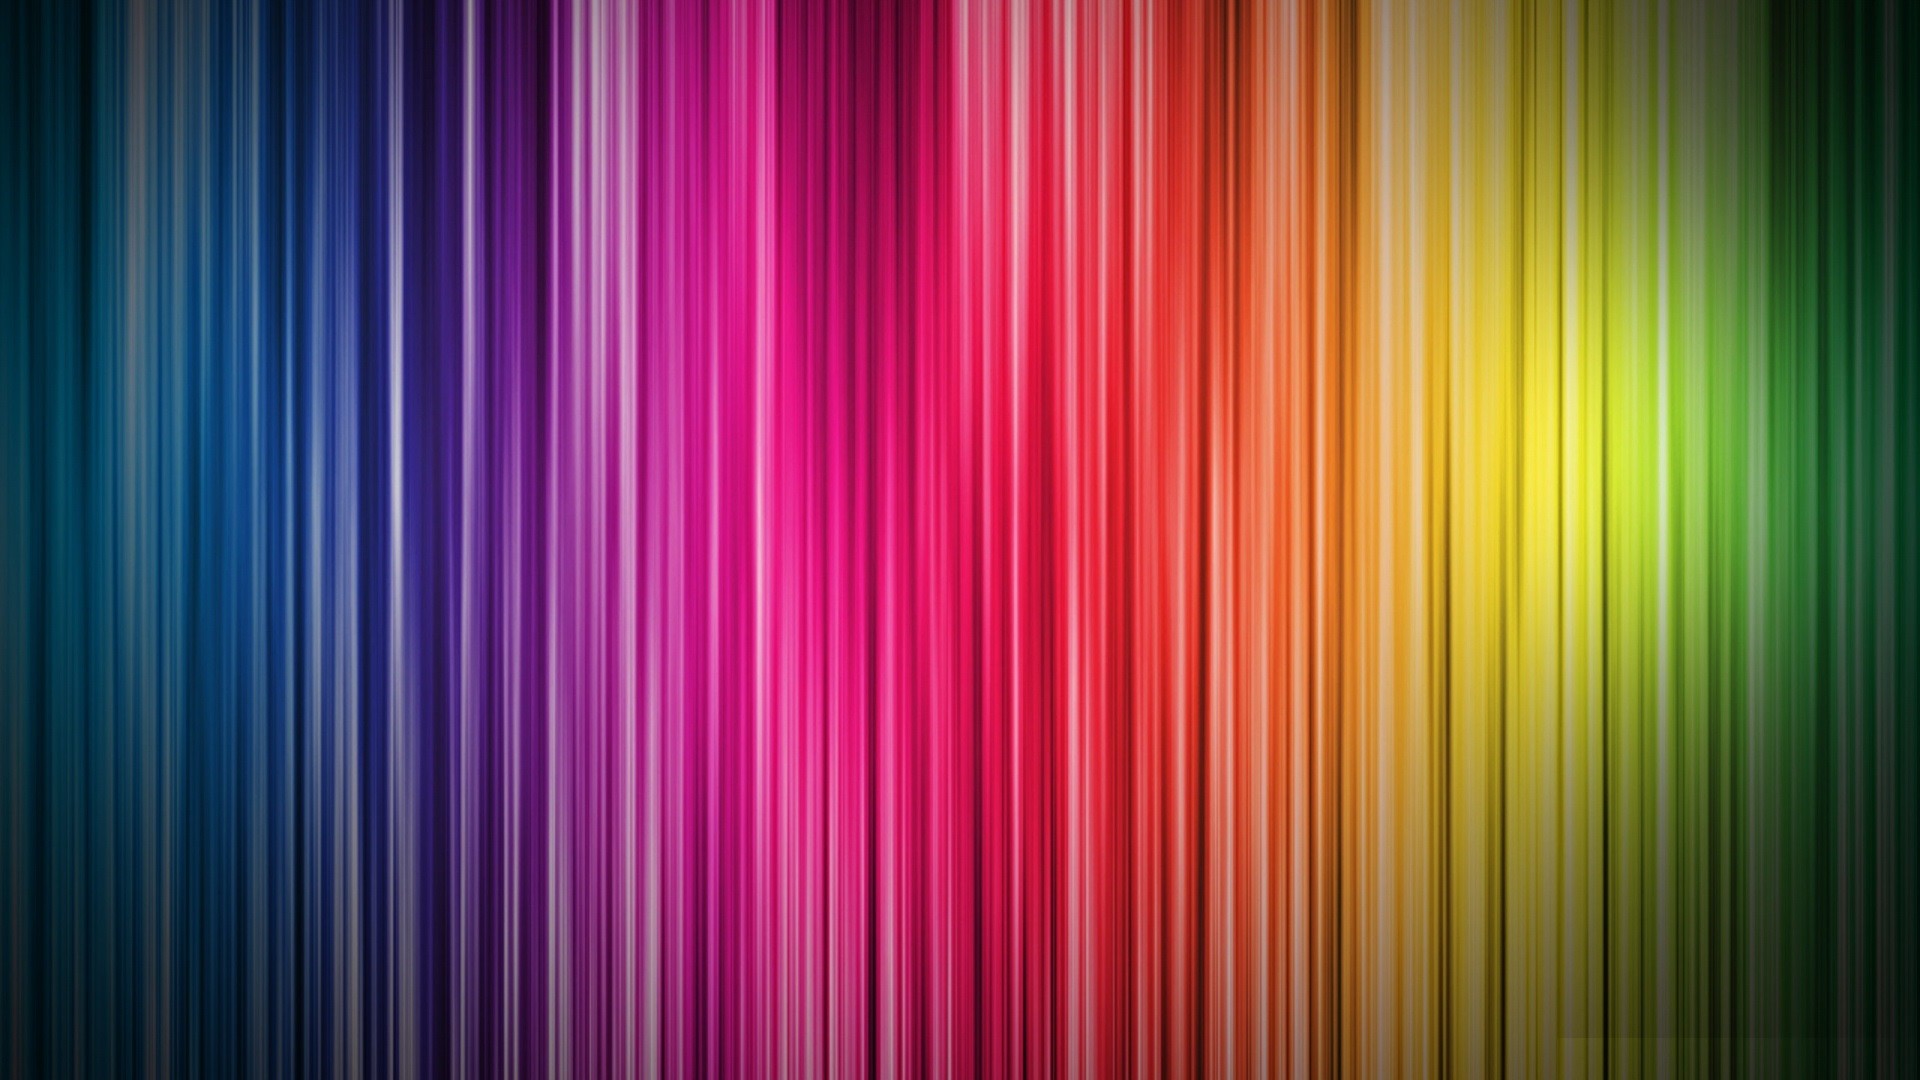 1920x1080 Rainbow, Full, Hd, Wallpaper, Download, Photos, Free, Best Backgrounds,  Windows Wallpaper, Wallpapers For Large Screens, 1920Ã1080 Wallpaper HD